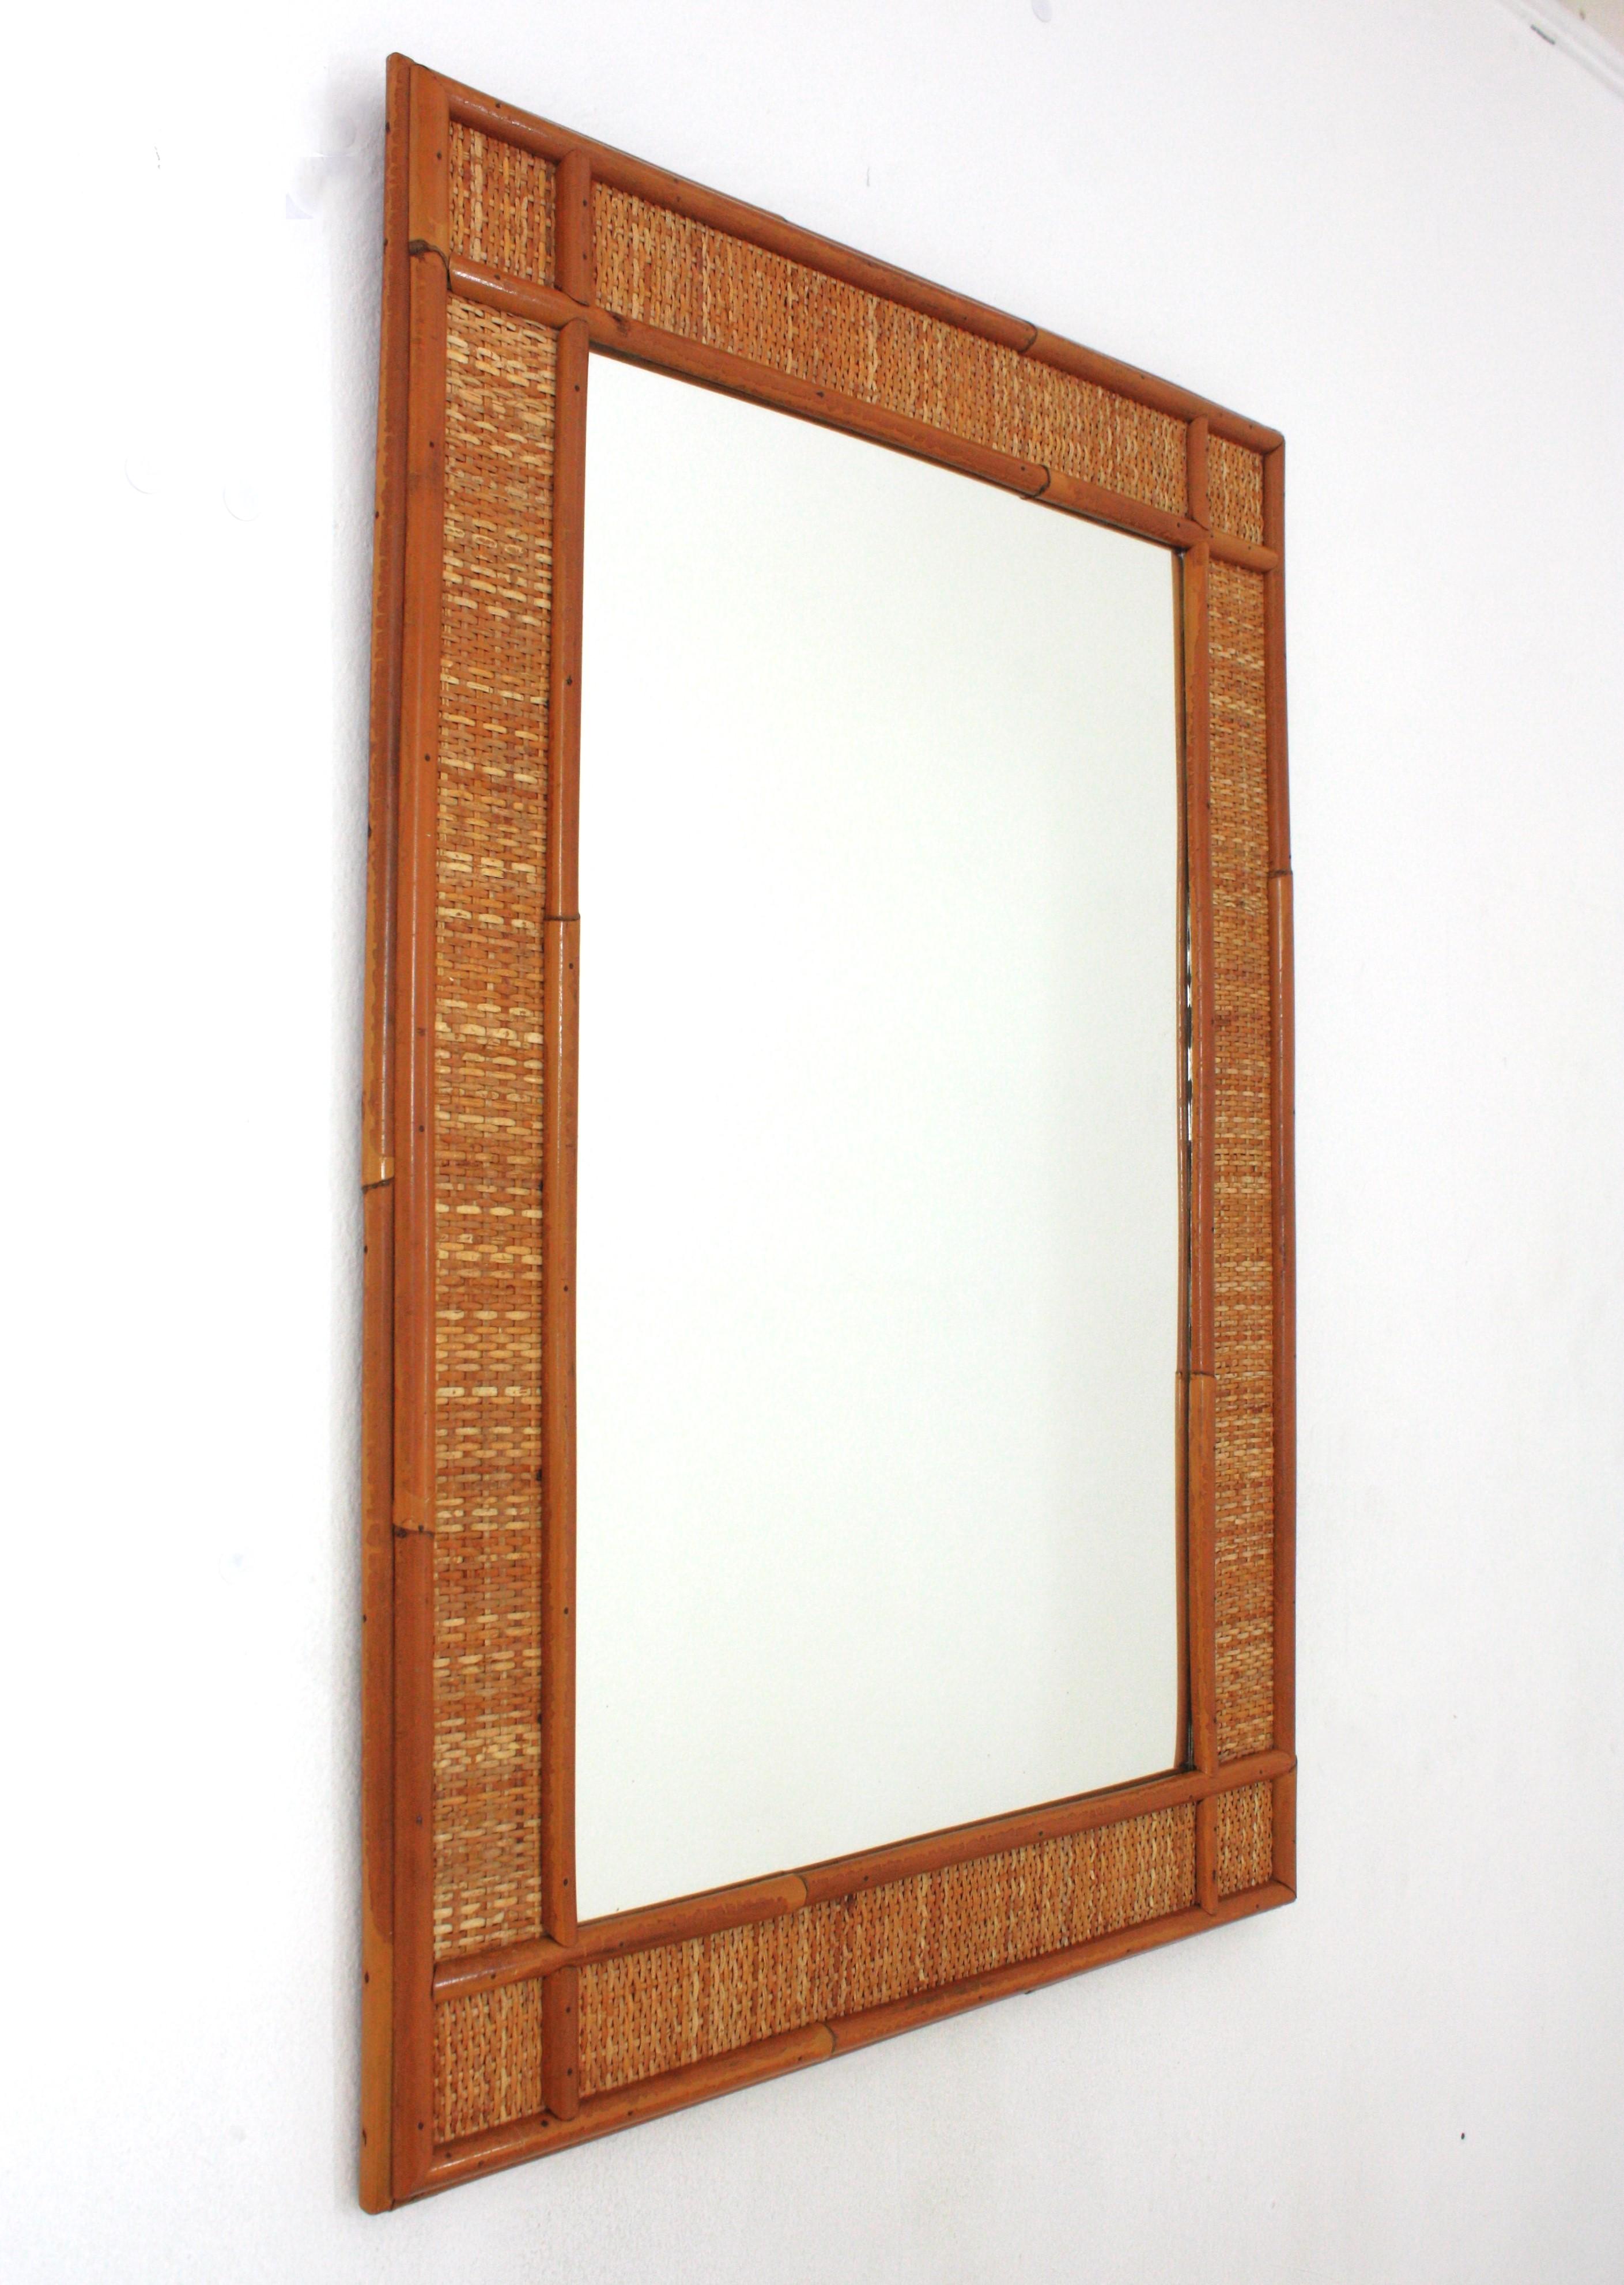 Hand-Crafted Coastal Rectangular Mirror in Rattan & Woven Wicker, Spain, 1960s For Sale